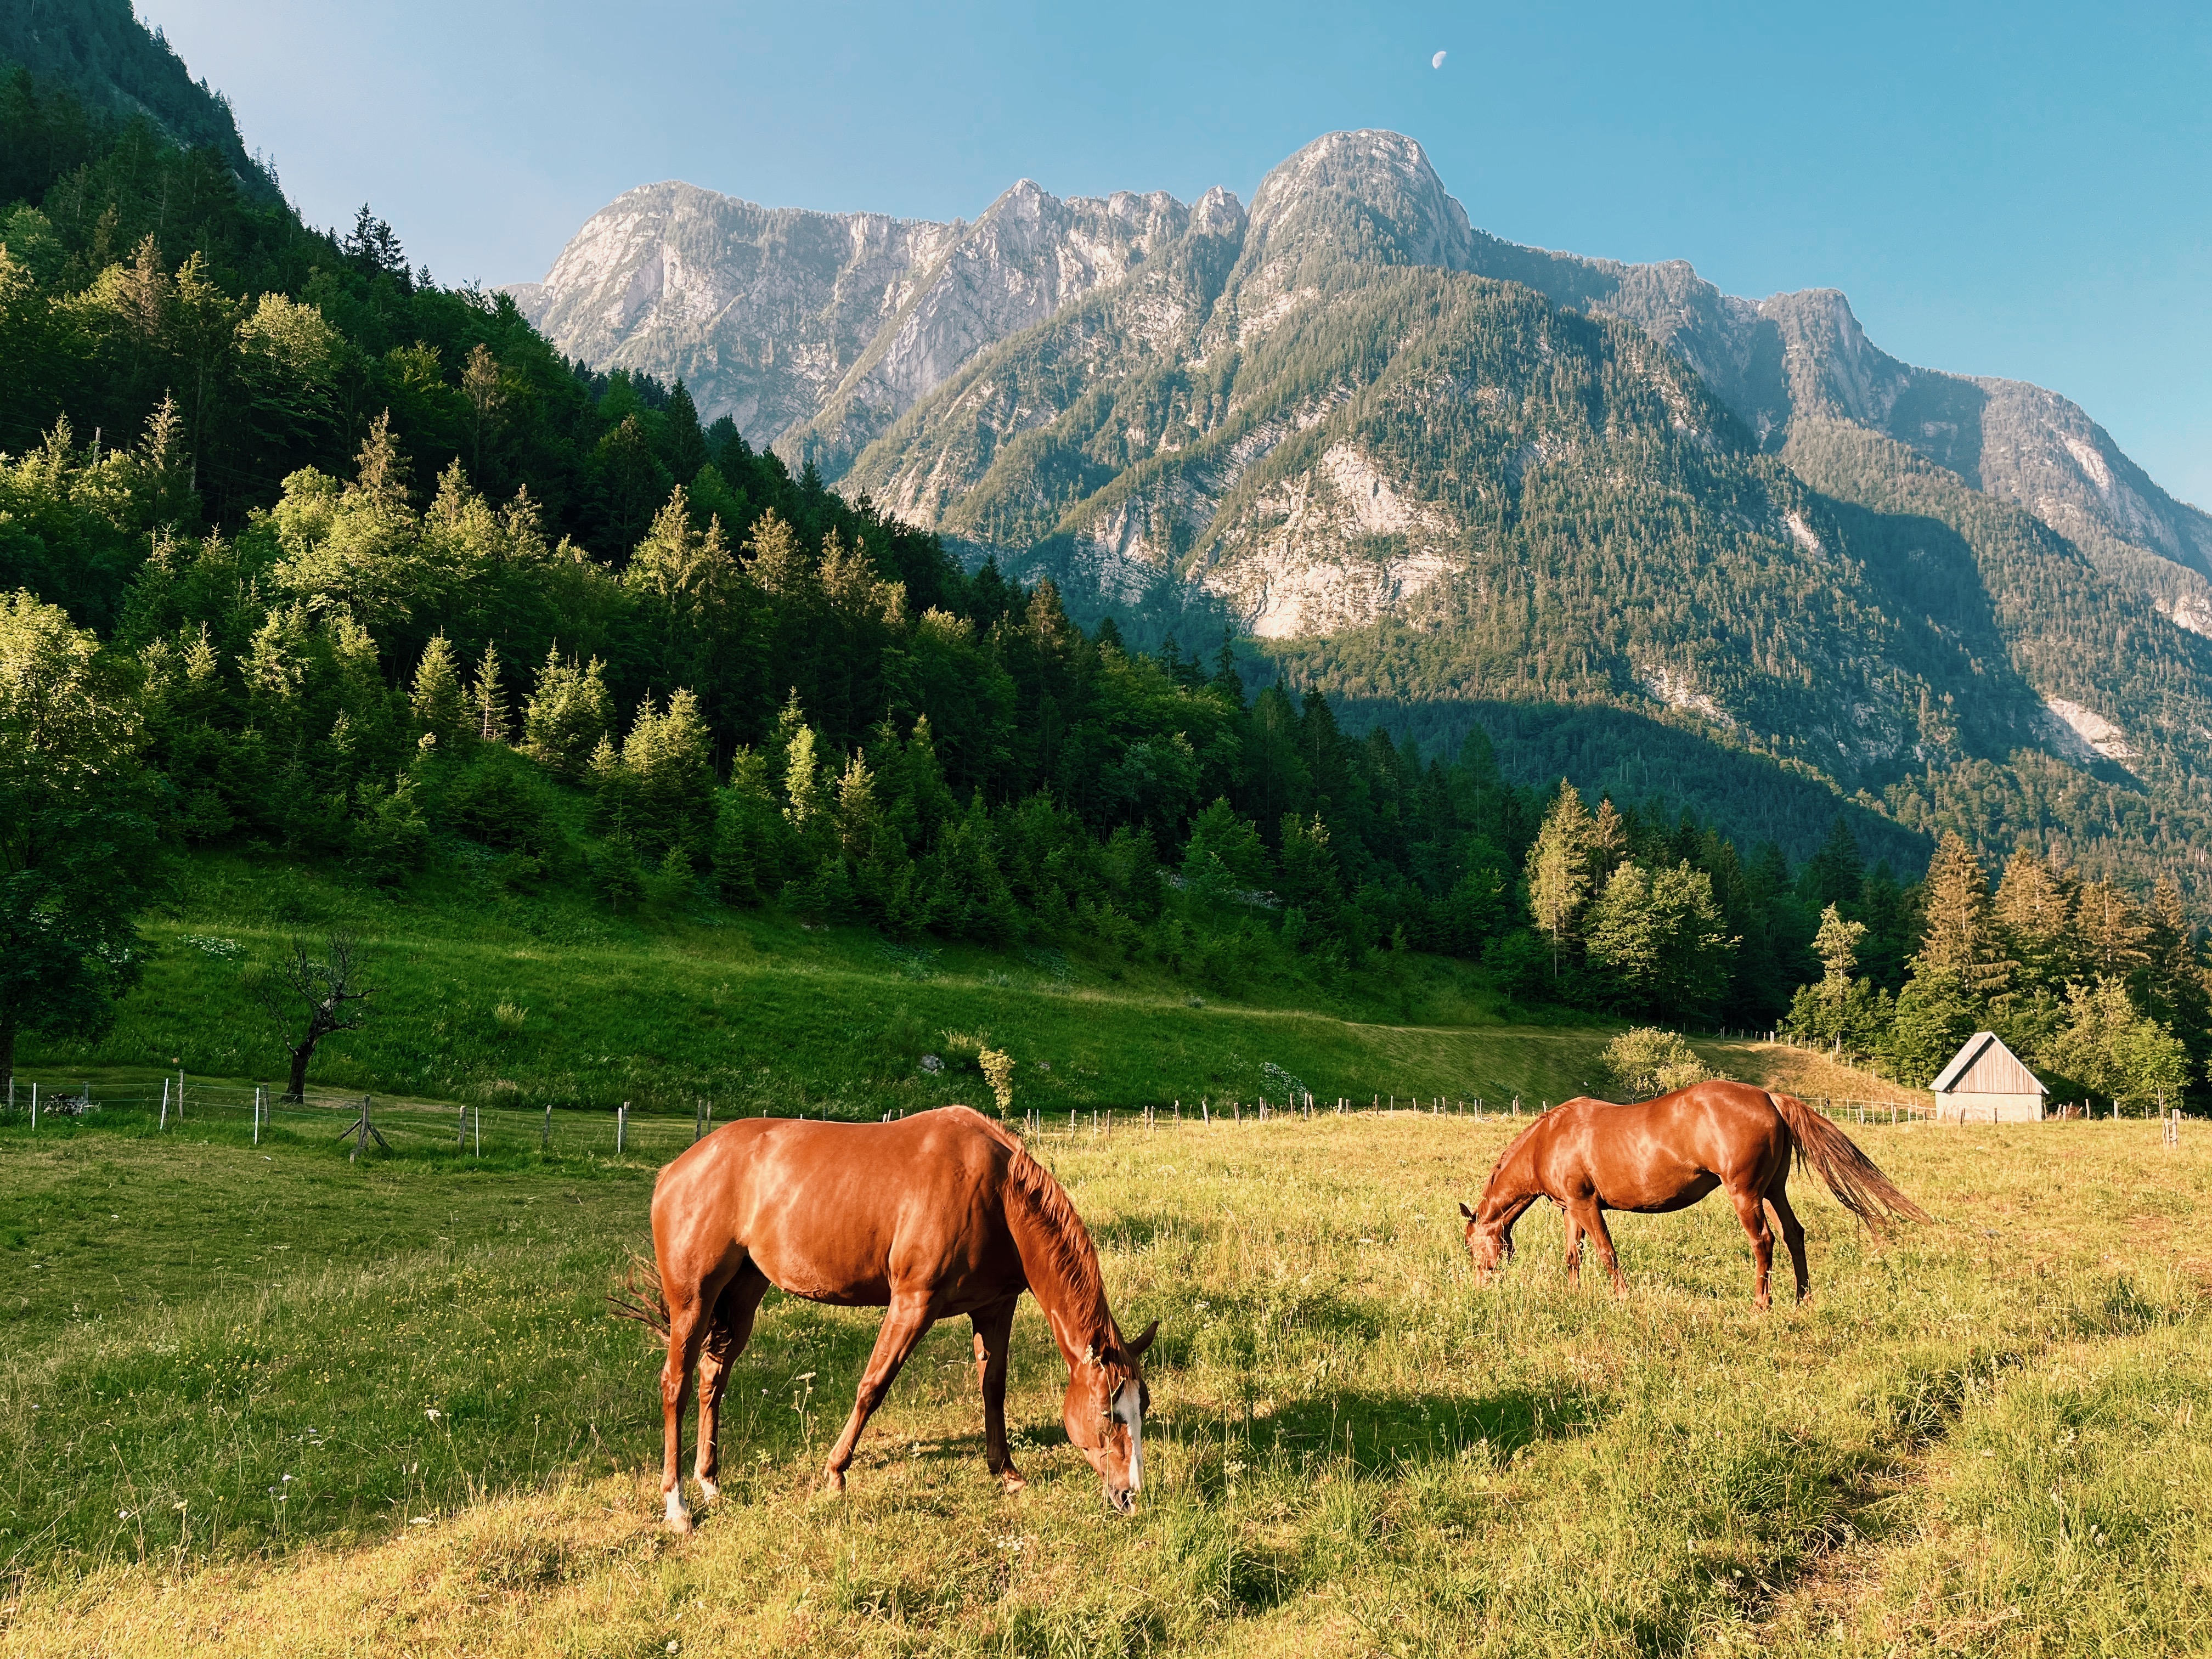 Horses grazing in front of mountain range in the Soca Valley, Slovenia, on the Alpe Adria Trail, the best thru-hiking trail for beginners